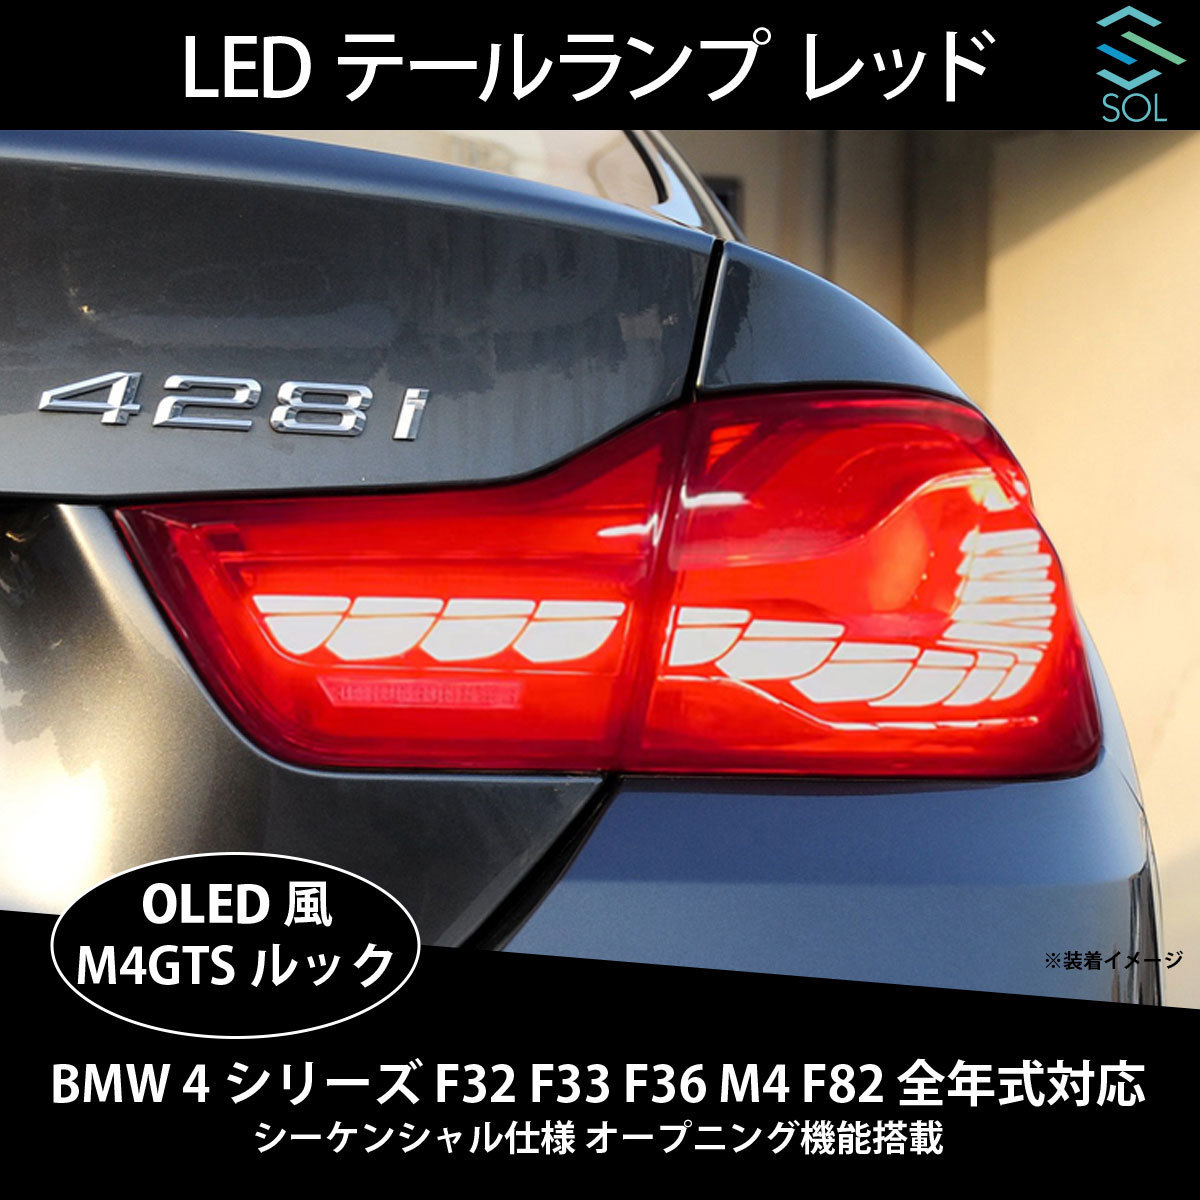 BMW 4 series F32 F33 F36 M4 F82 all model year correspondence M4GTS look OLED manner LED tail lamp red sequential specification opening function installing 